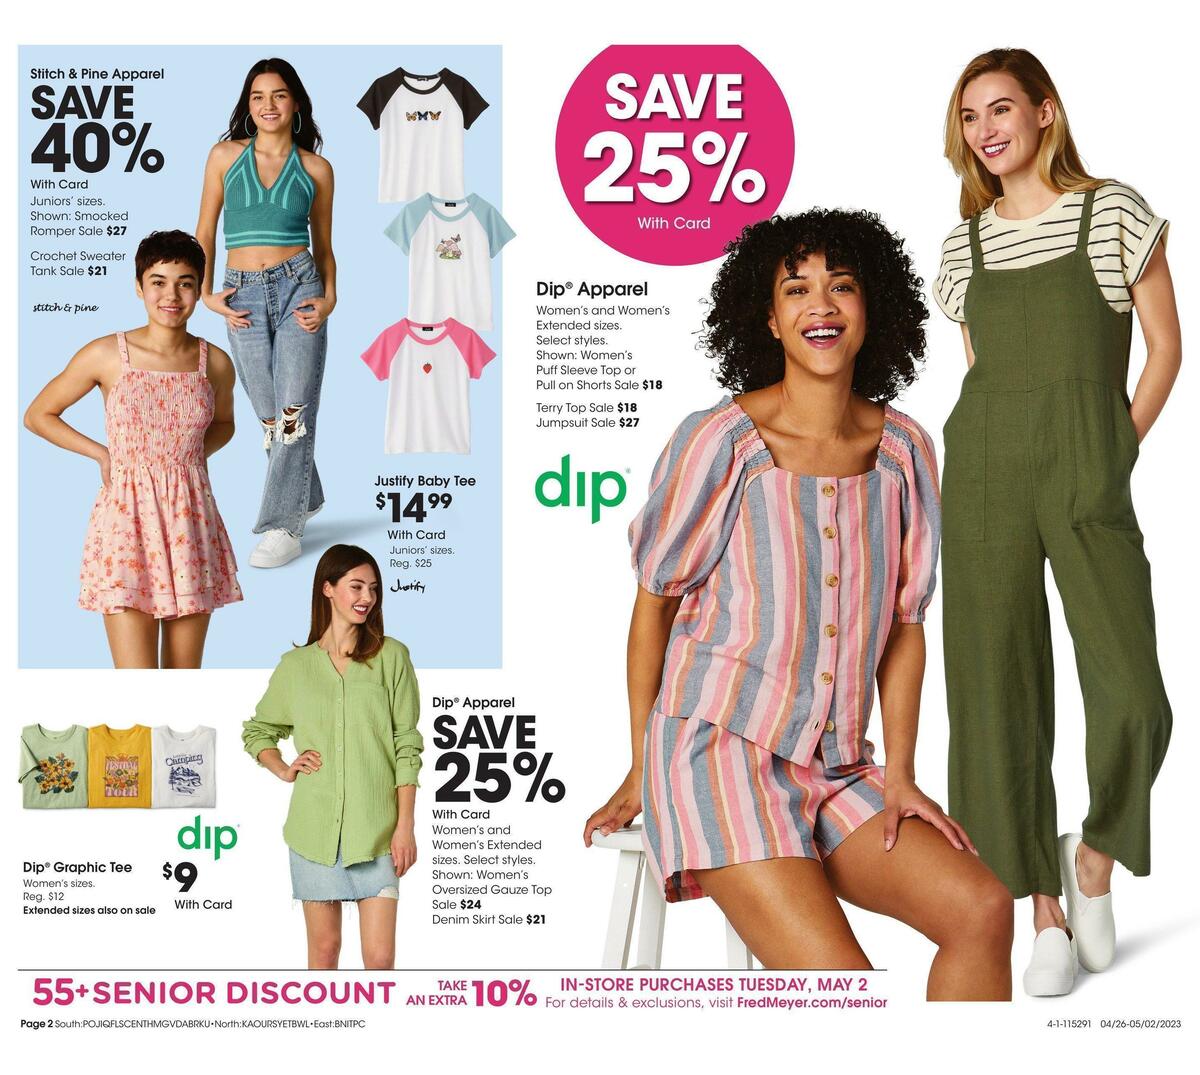 Fred Meyer General Merchandise Weekly Ad from April 26